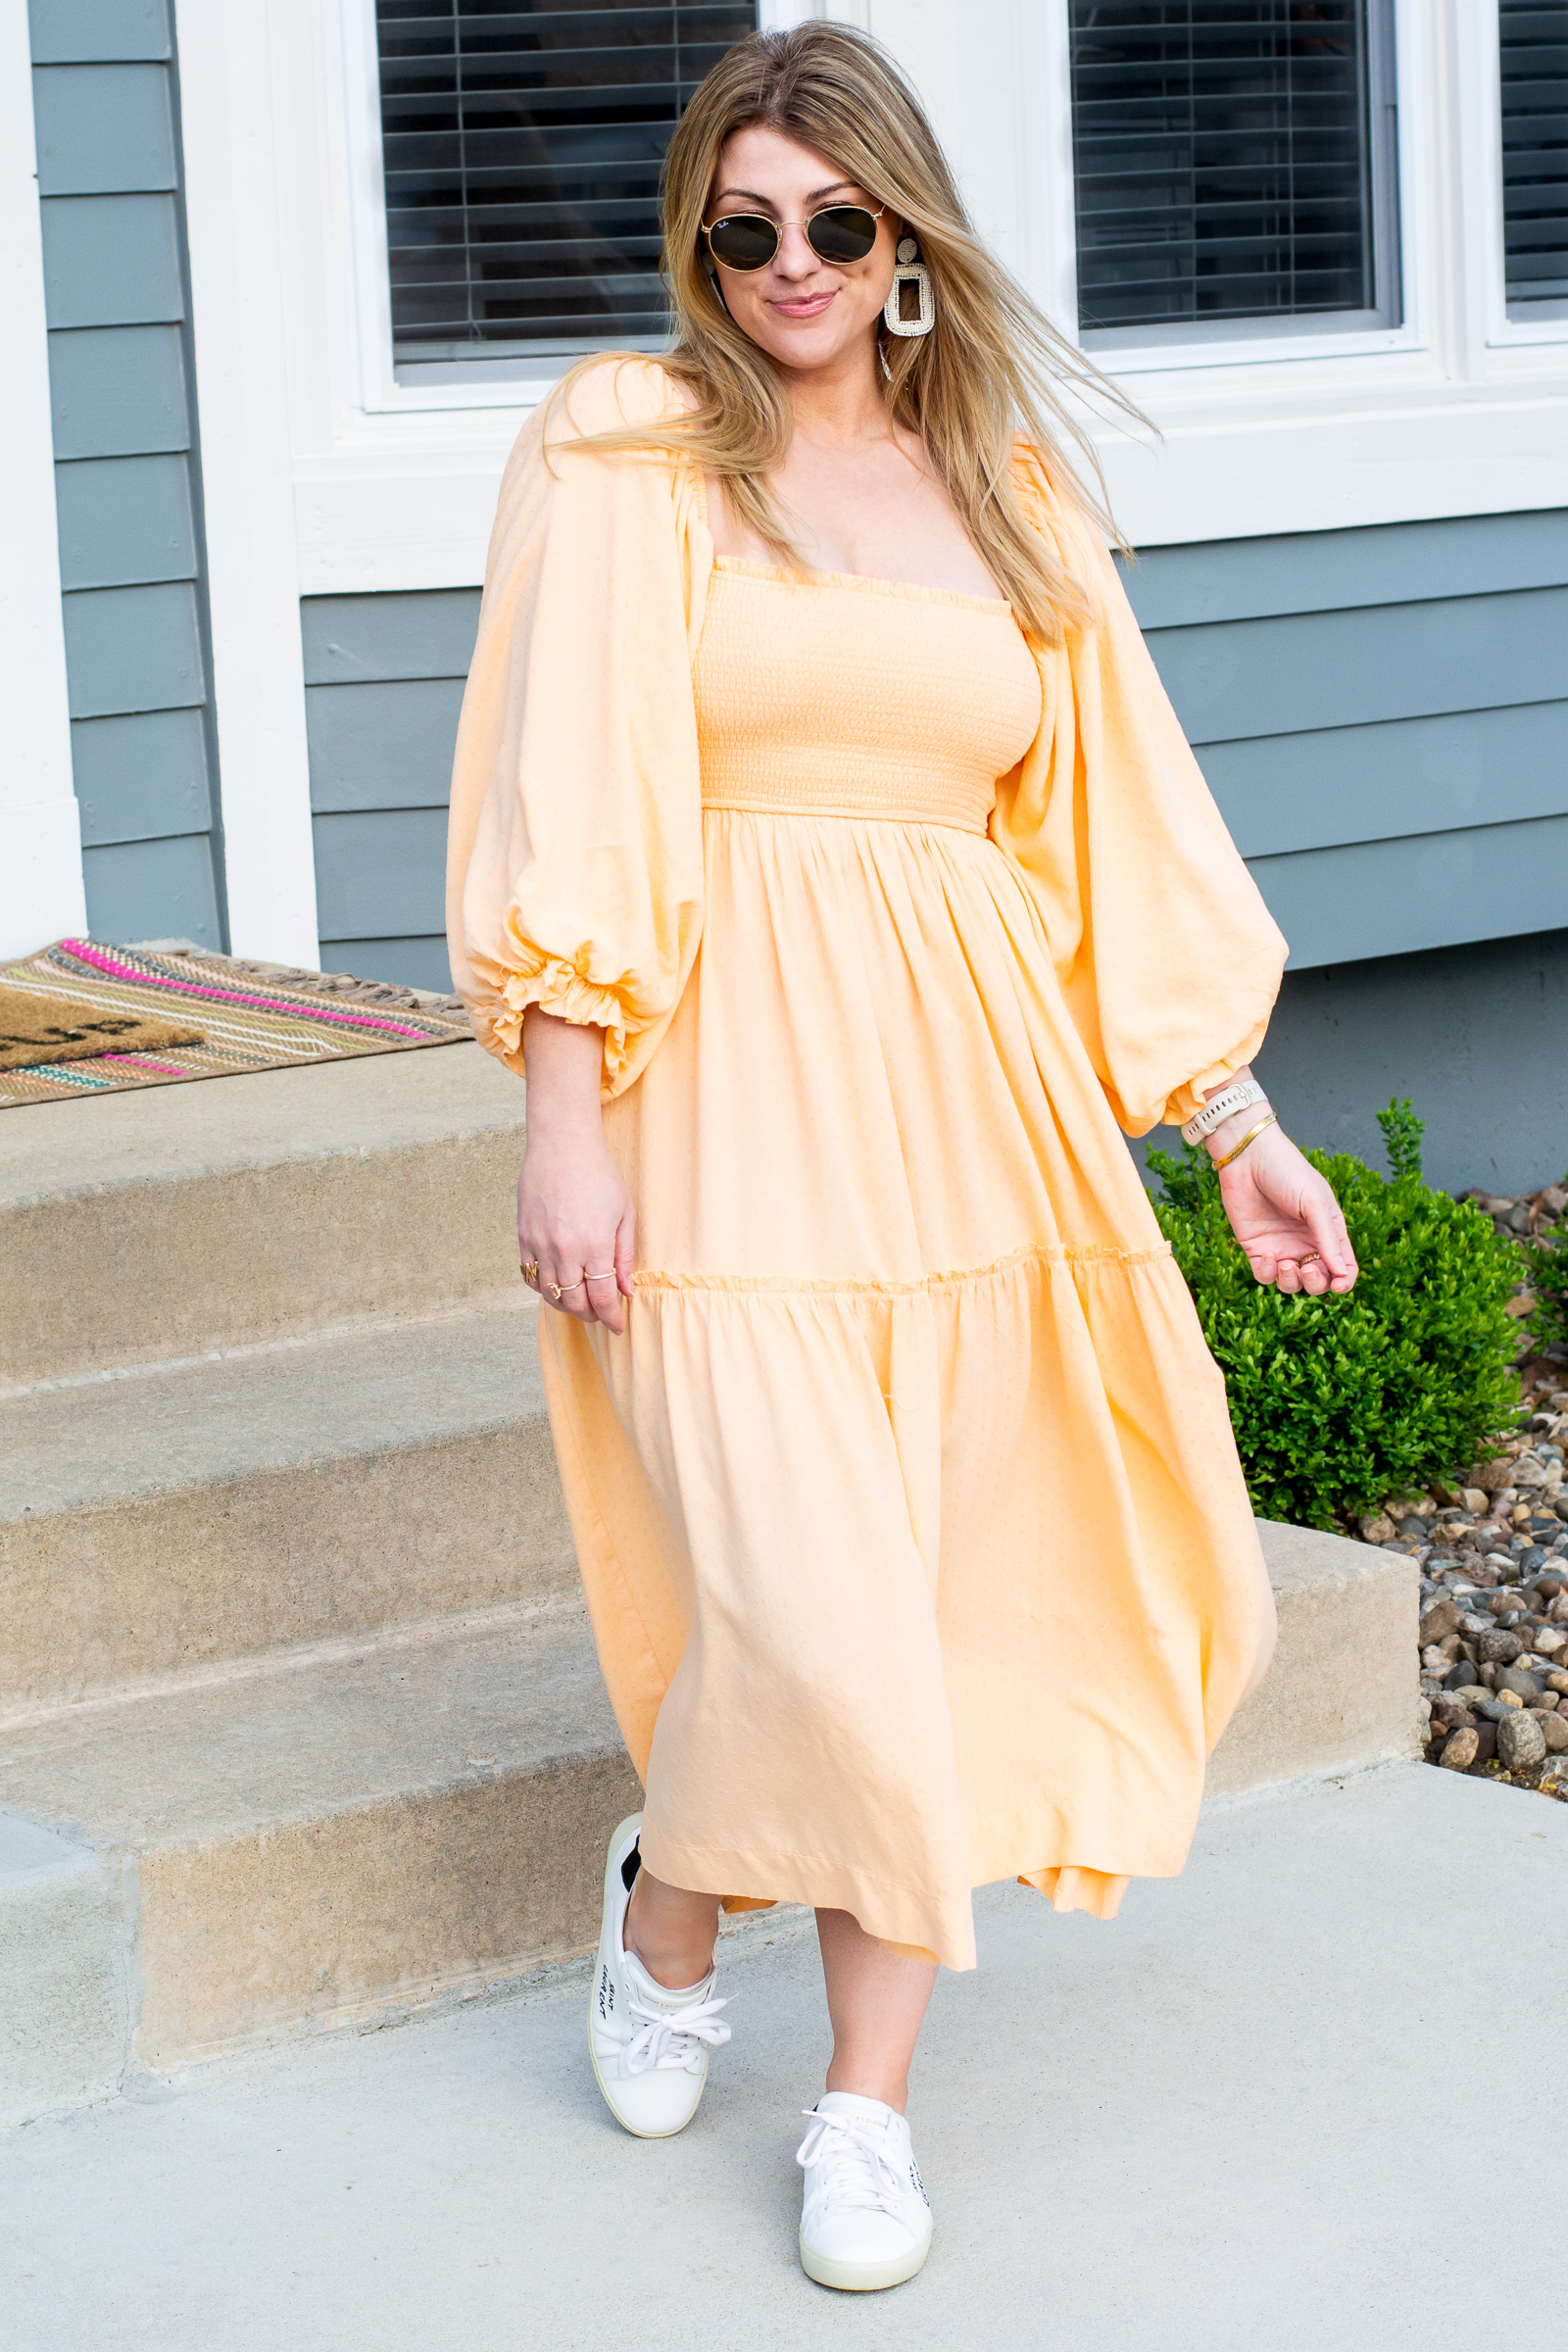 Summer Outfit Idea: Prairie Dress + Classic Sneakers. | LSR